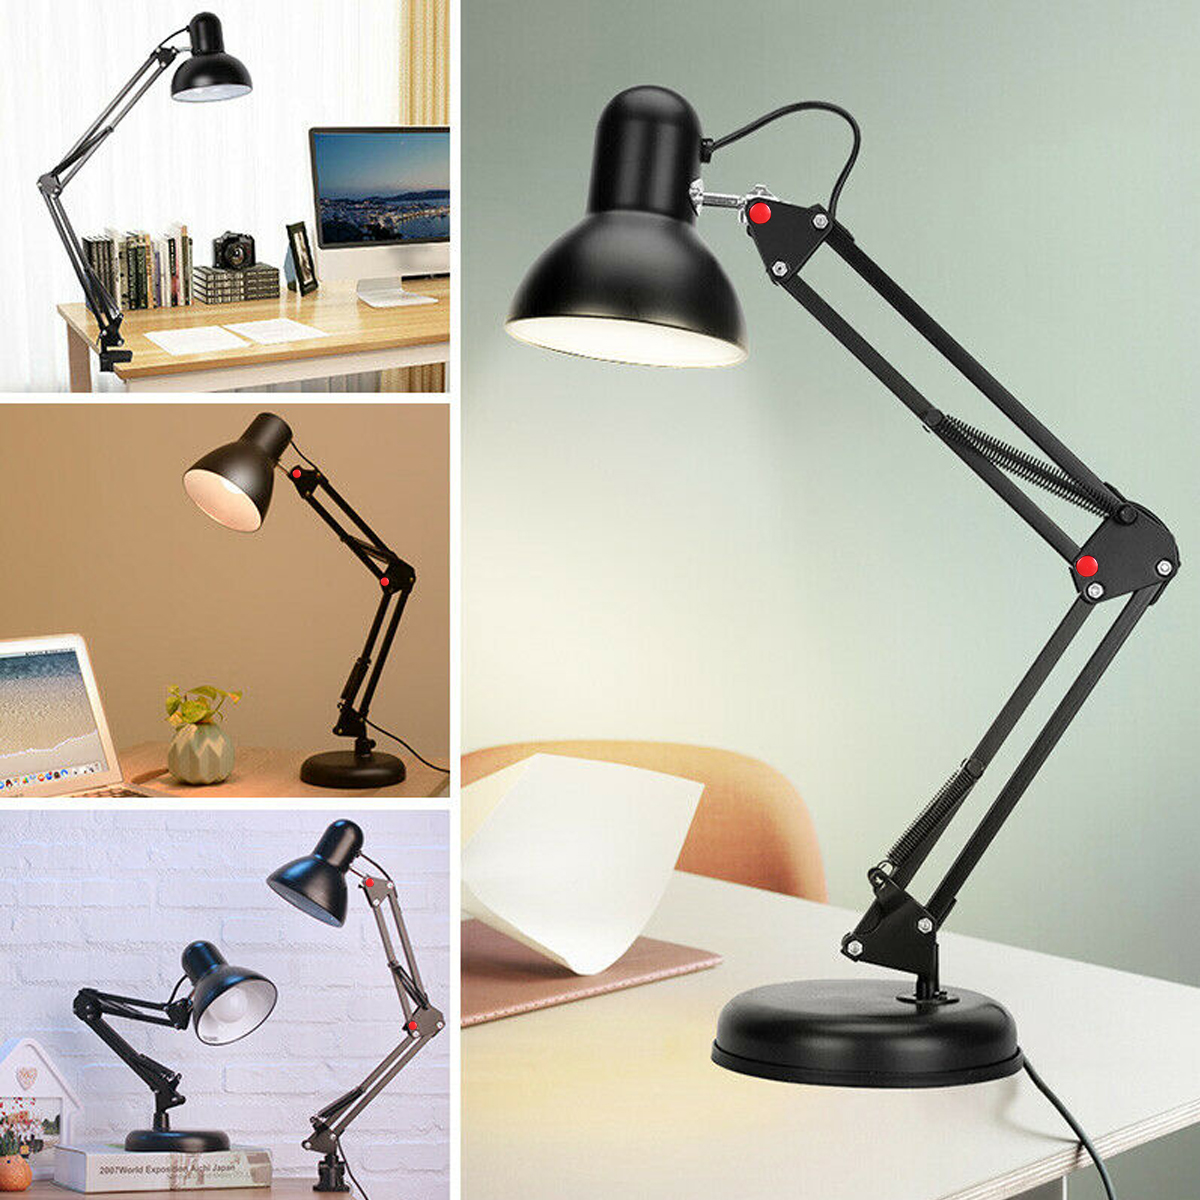 5W-Super-Bright-Swing-Arm-Desk-Lamp-Clamp-on-Table-Light-with-LED-Bulb-Metal-Clip-220V-1742397-7